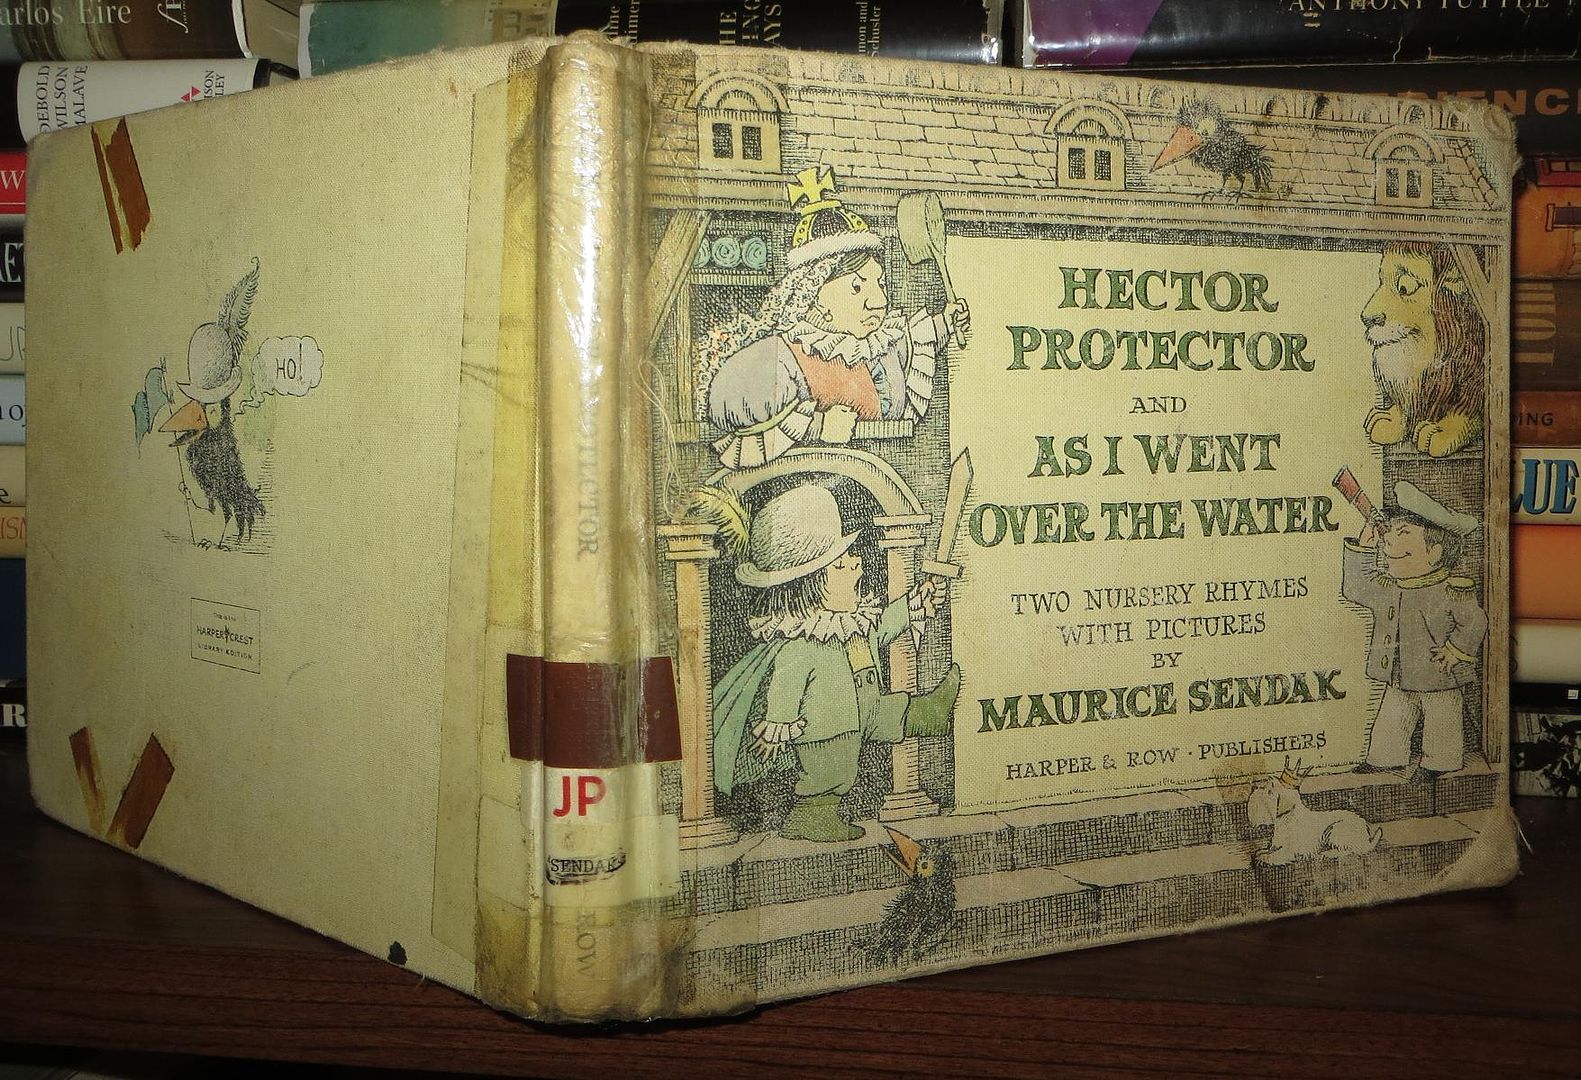 SENDAK, MAURICE - Hector Protector and As I Went over the Water